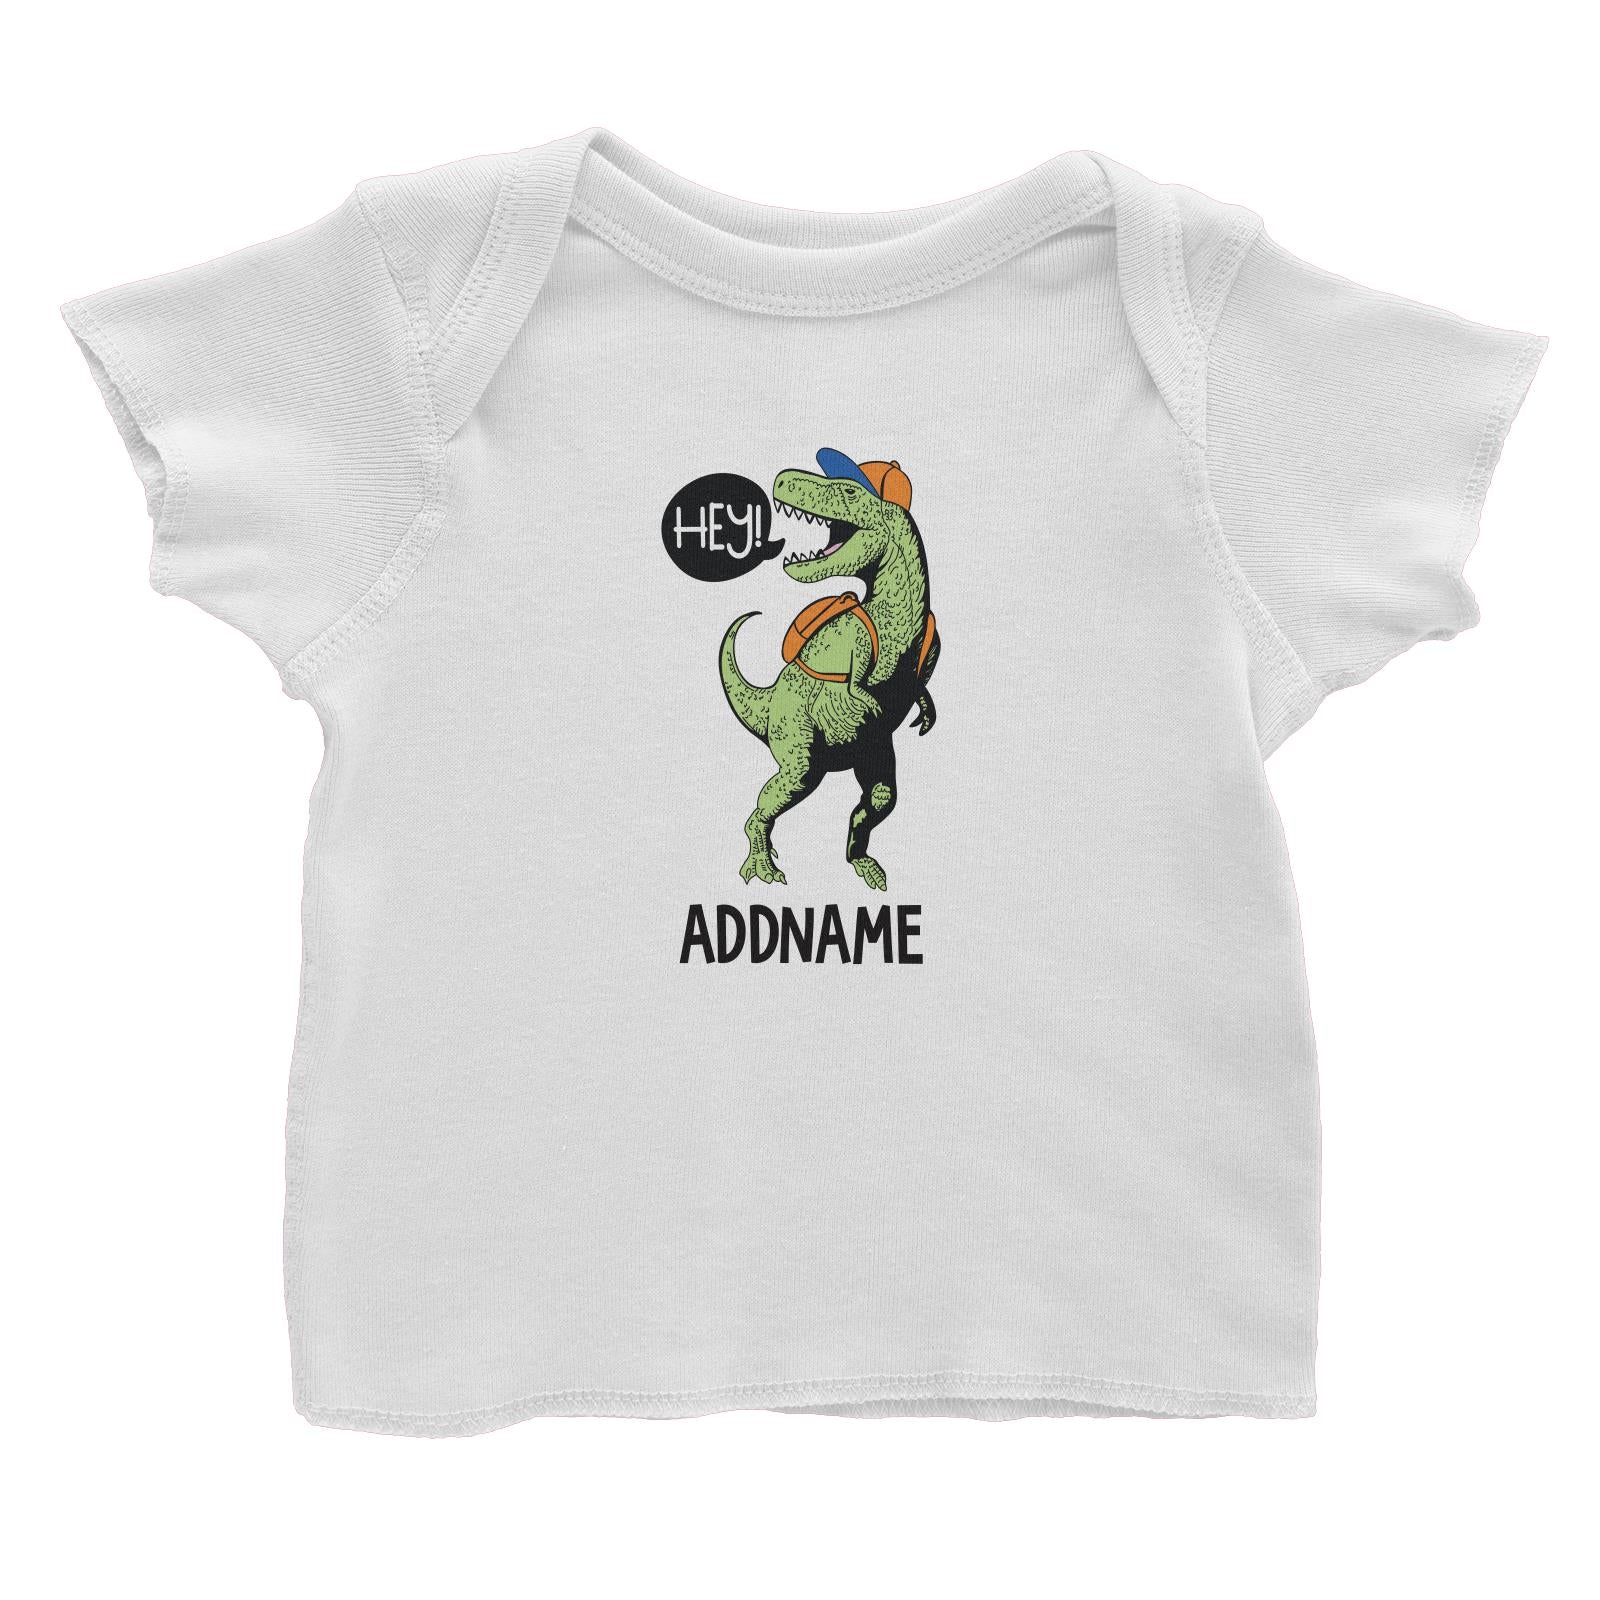 Cool Vibrant Series Hey Dinosaur With Back Pack Addname Baby T-Shirt [SALE]